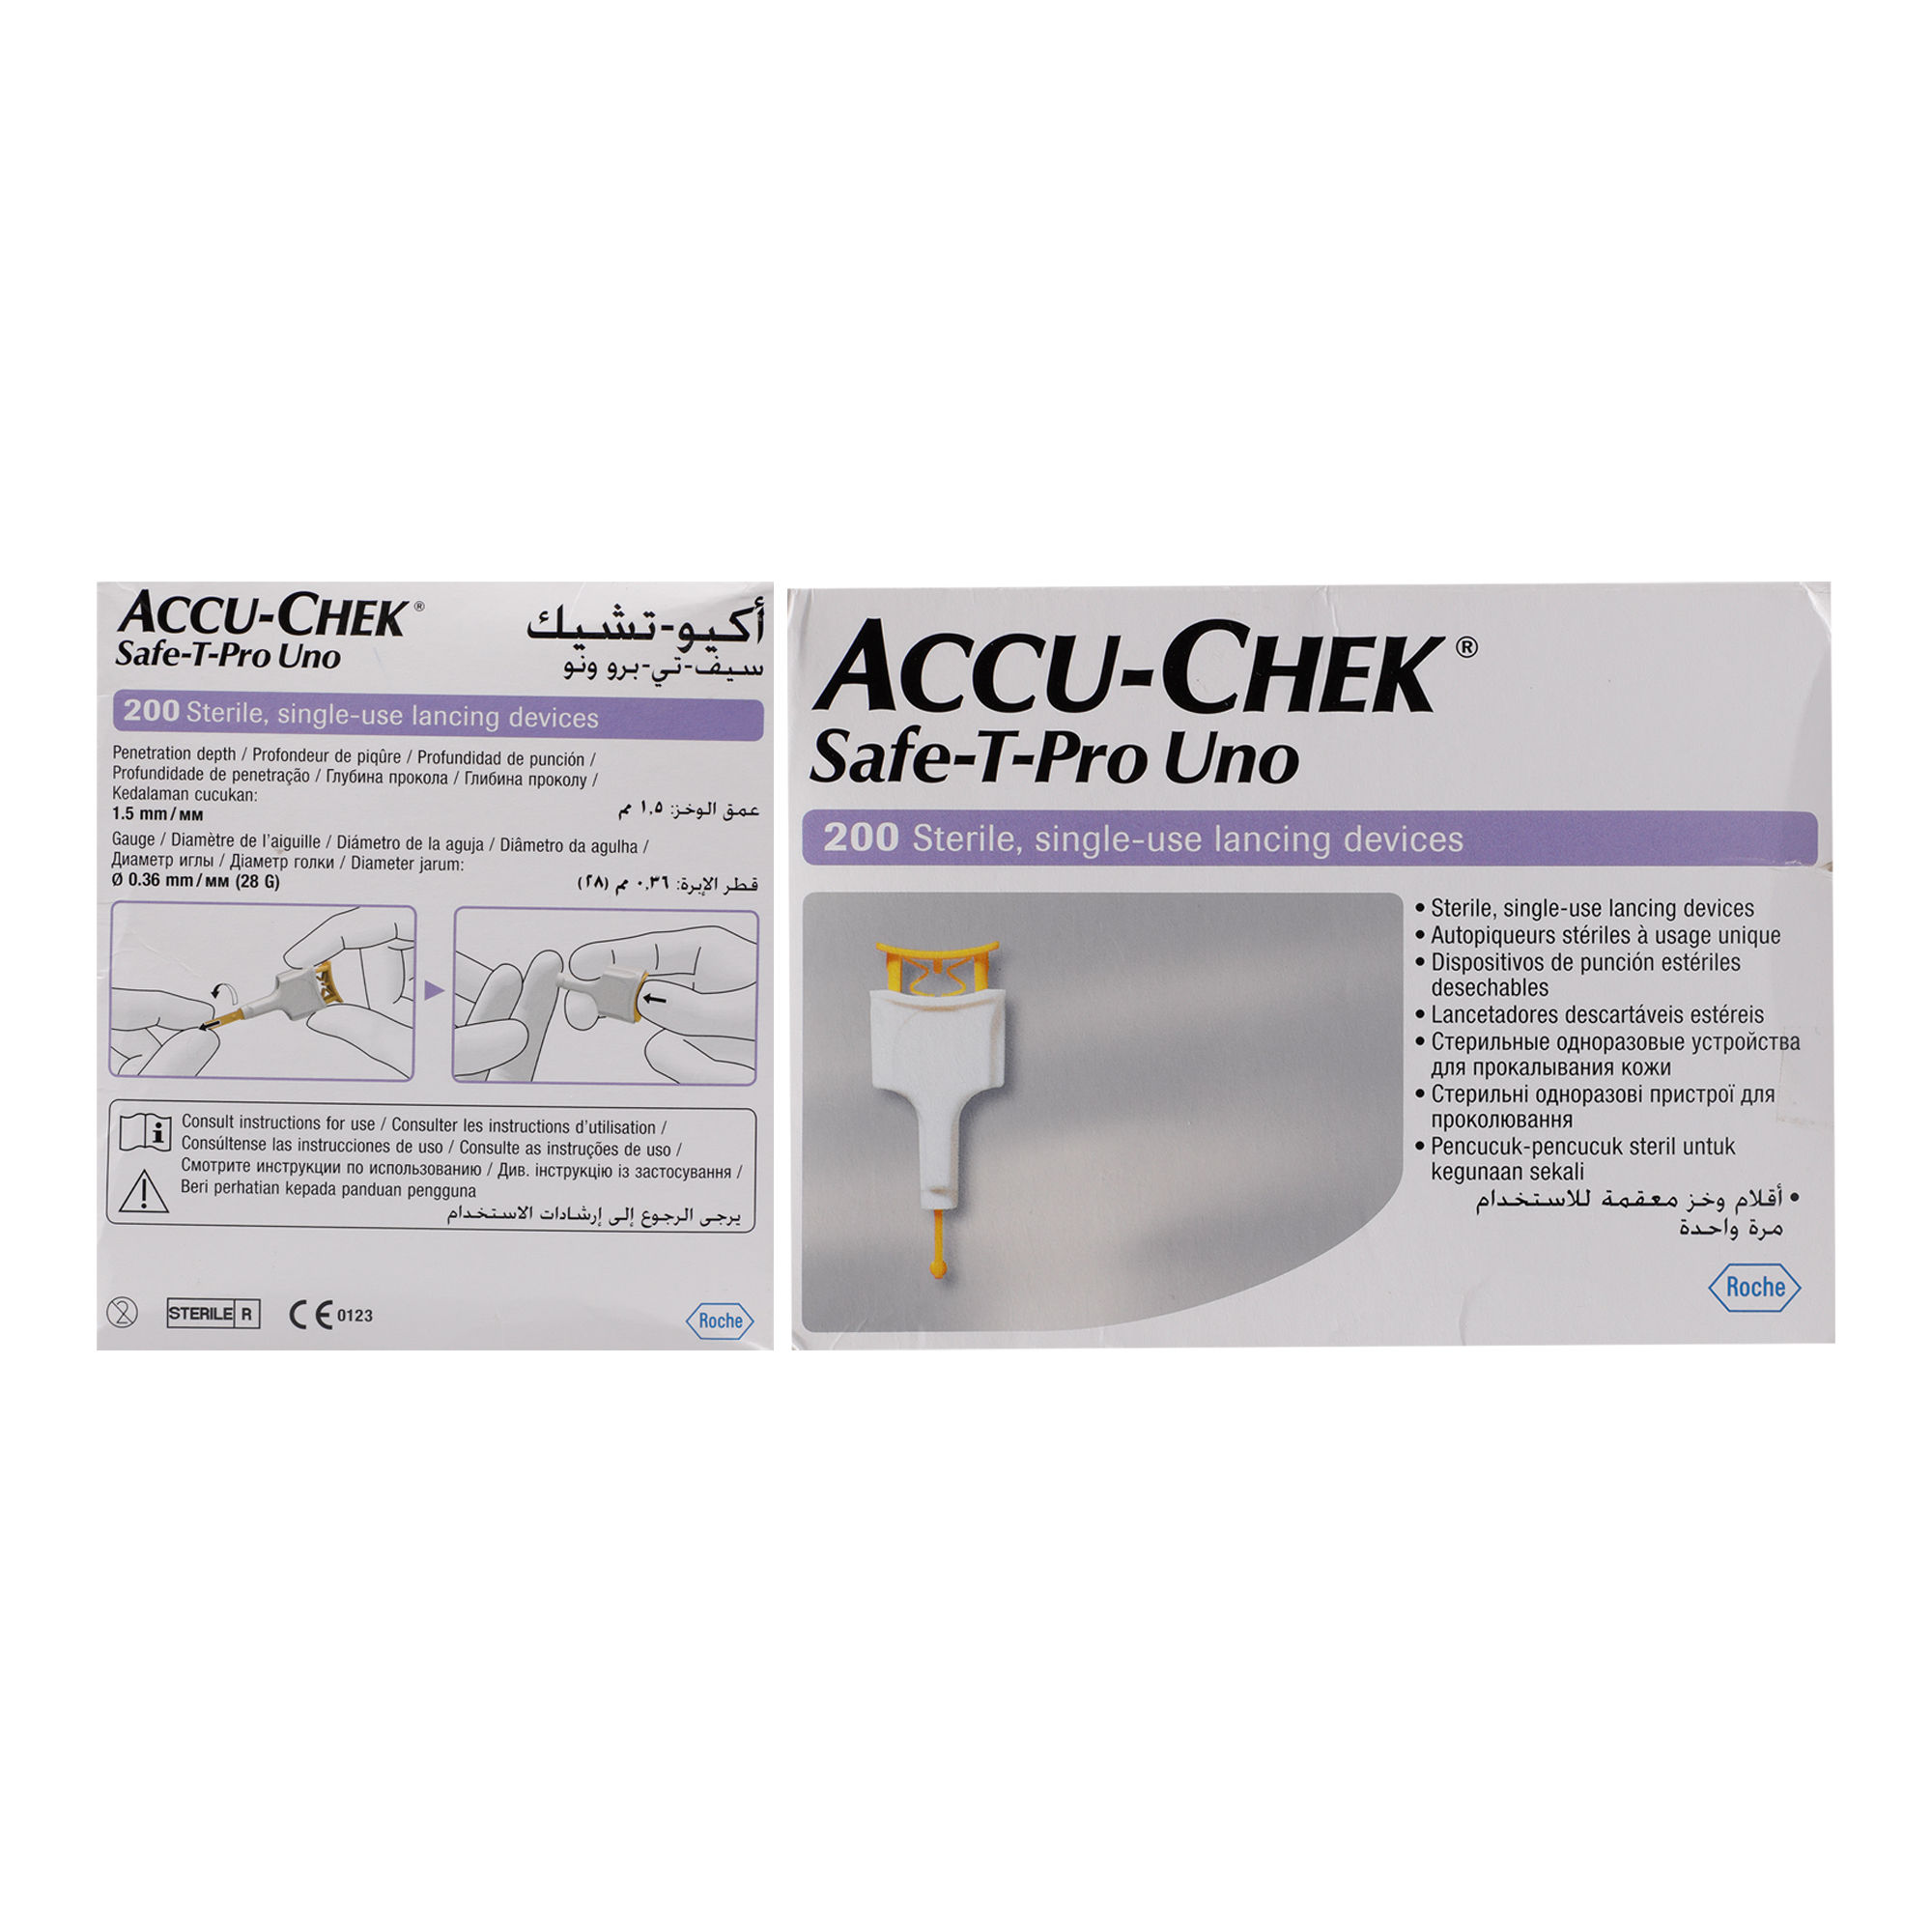 Accu-Chek Safe-T-Pro Uno Lancets, 200 Count, Pack of 1 